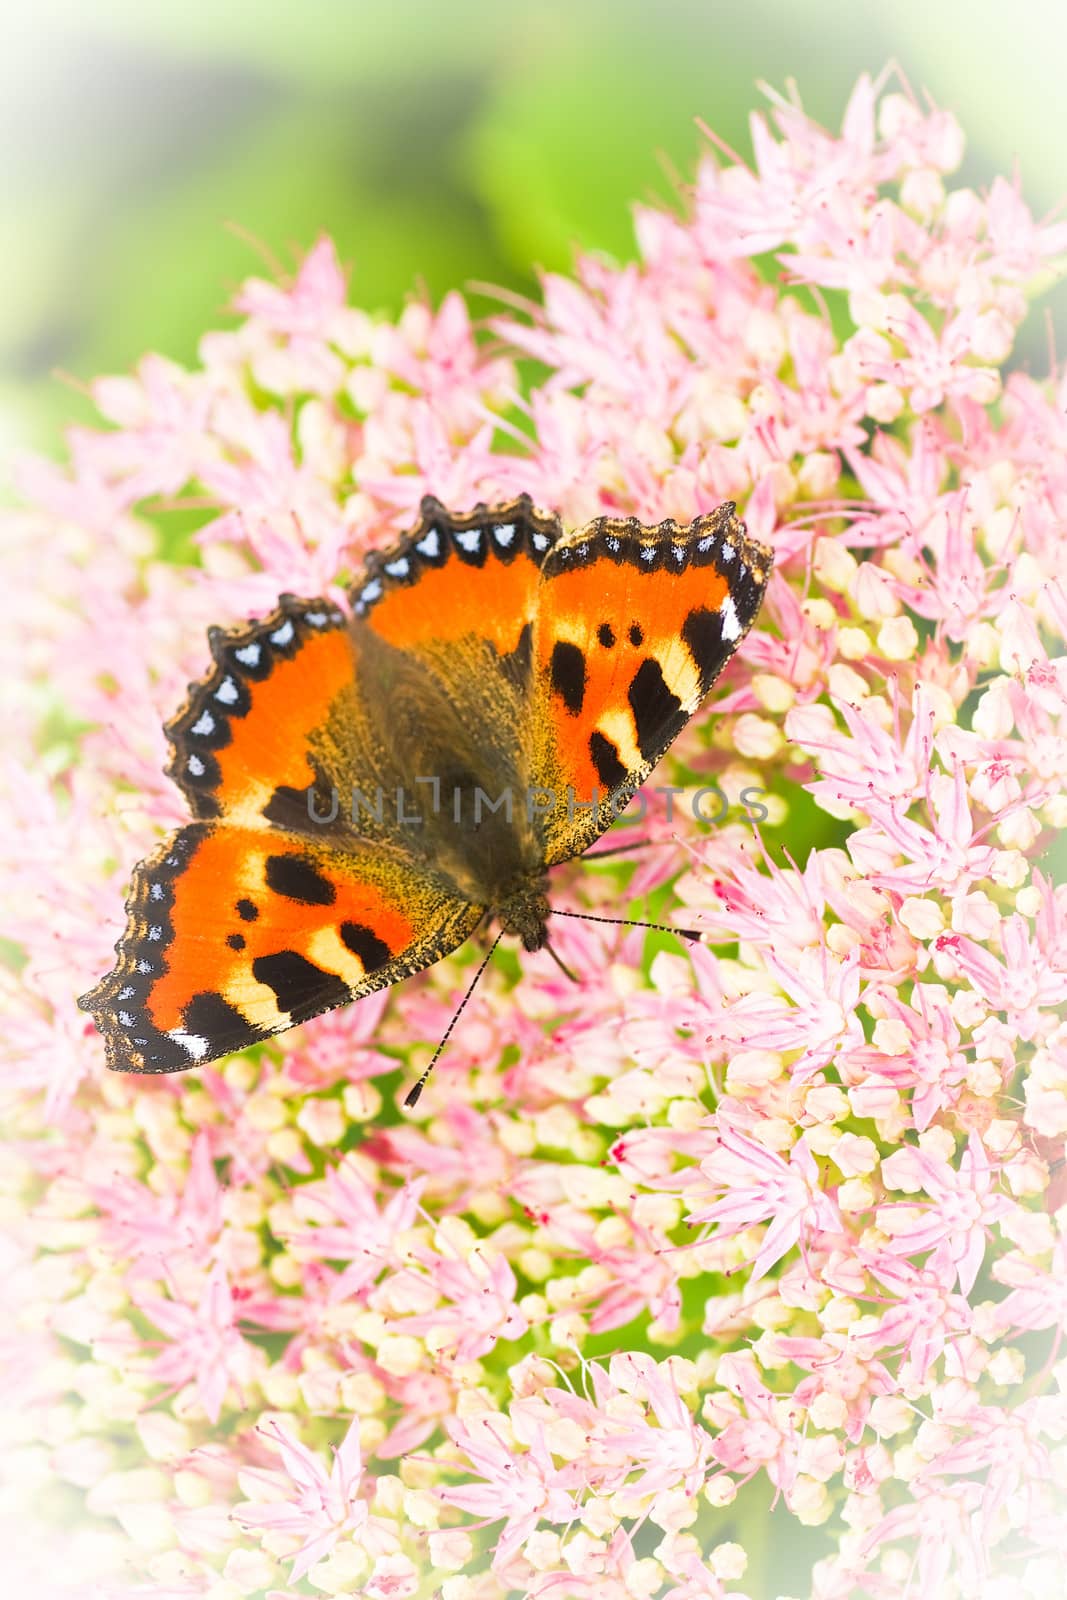 Small tortoiseshell butterfly or Aglais urticae on Sedum flowers by Colette